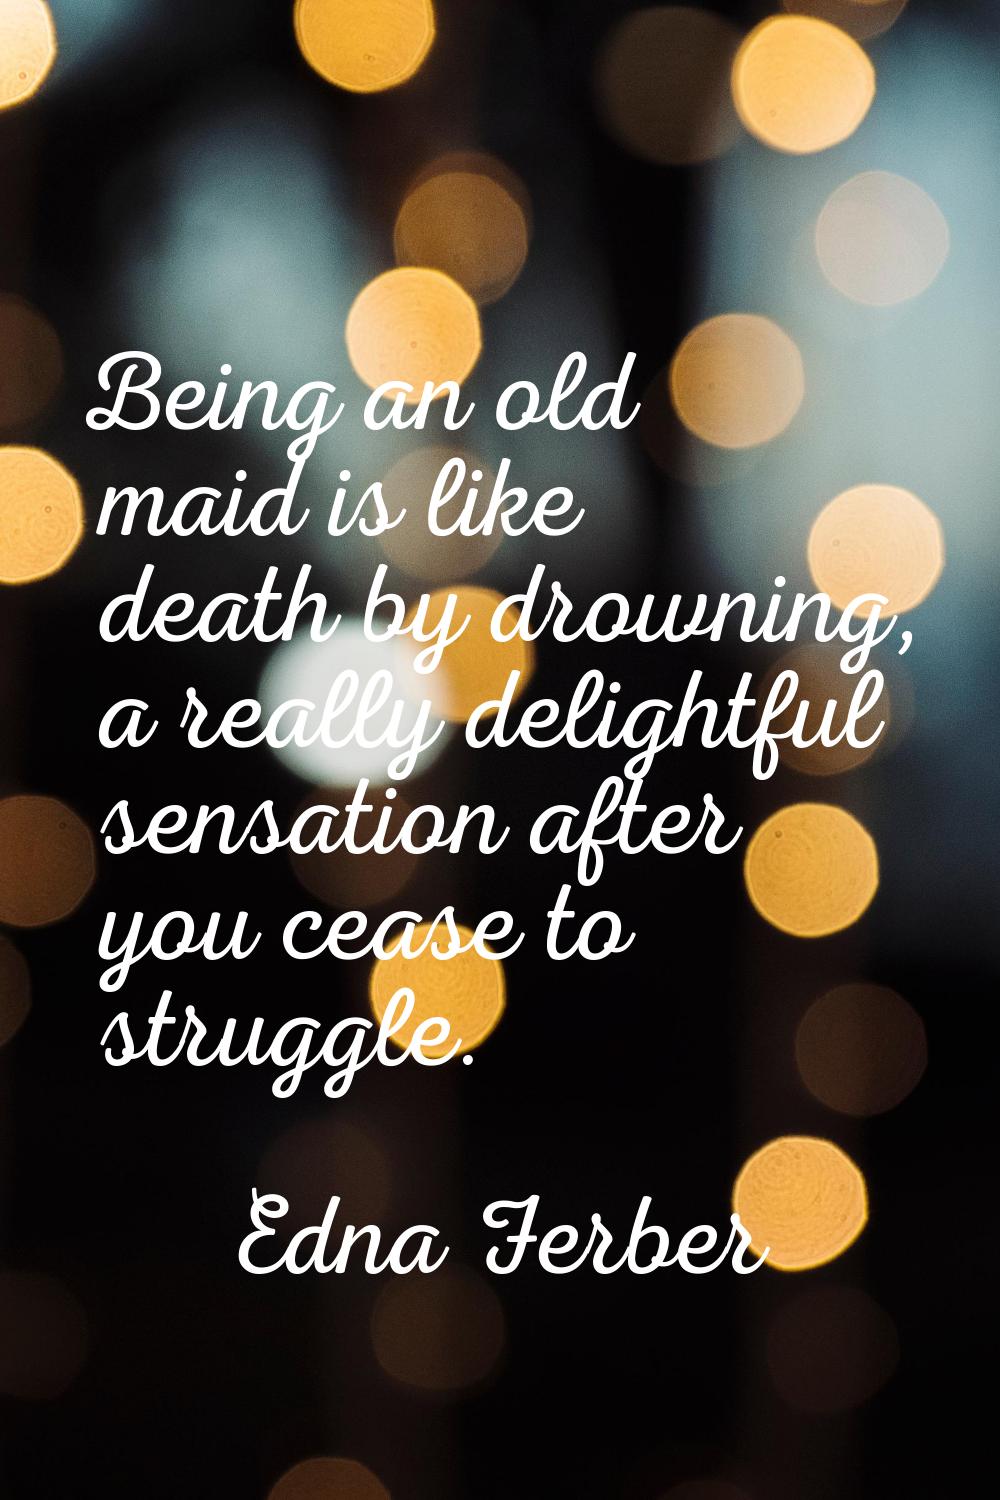 Being an old maid is like death by drowning, a really delightful sensation after you cease to strug